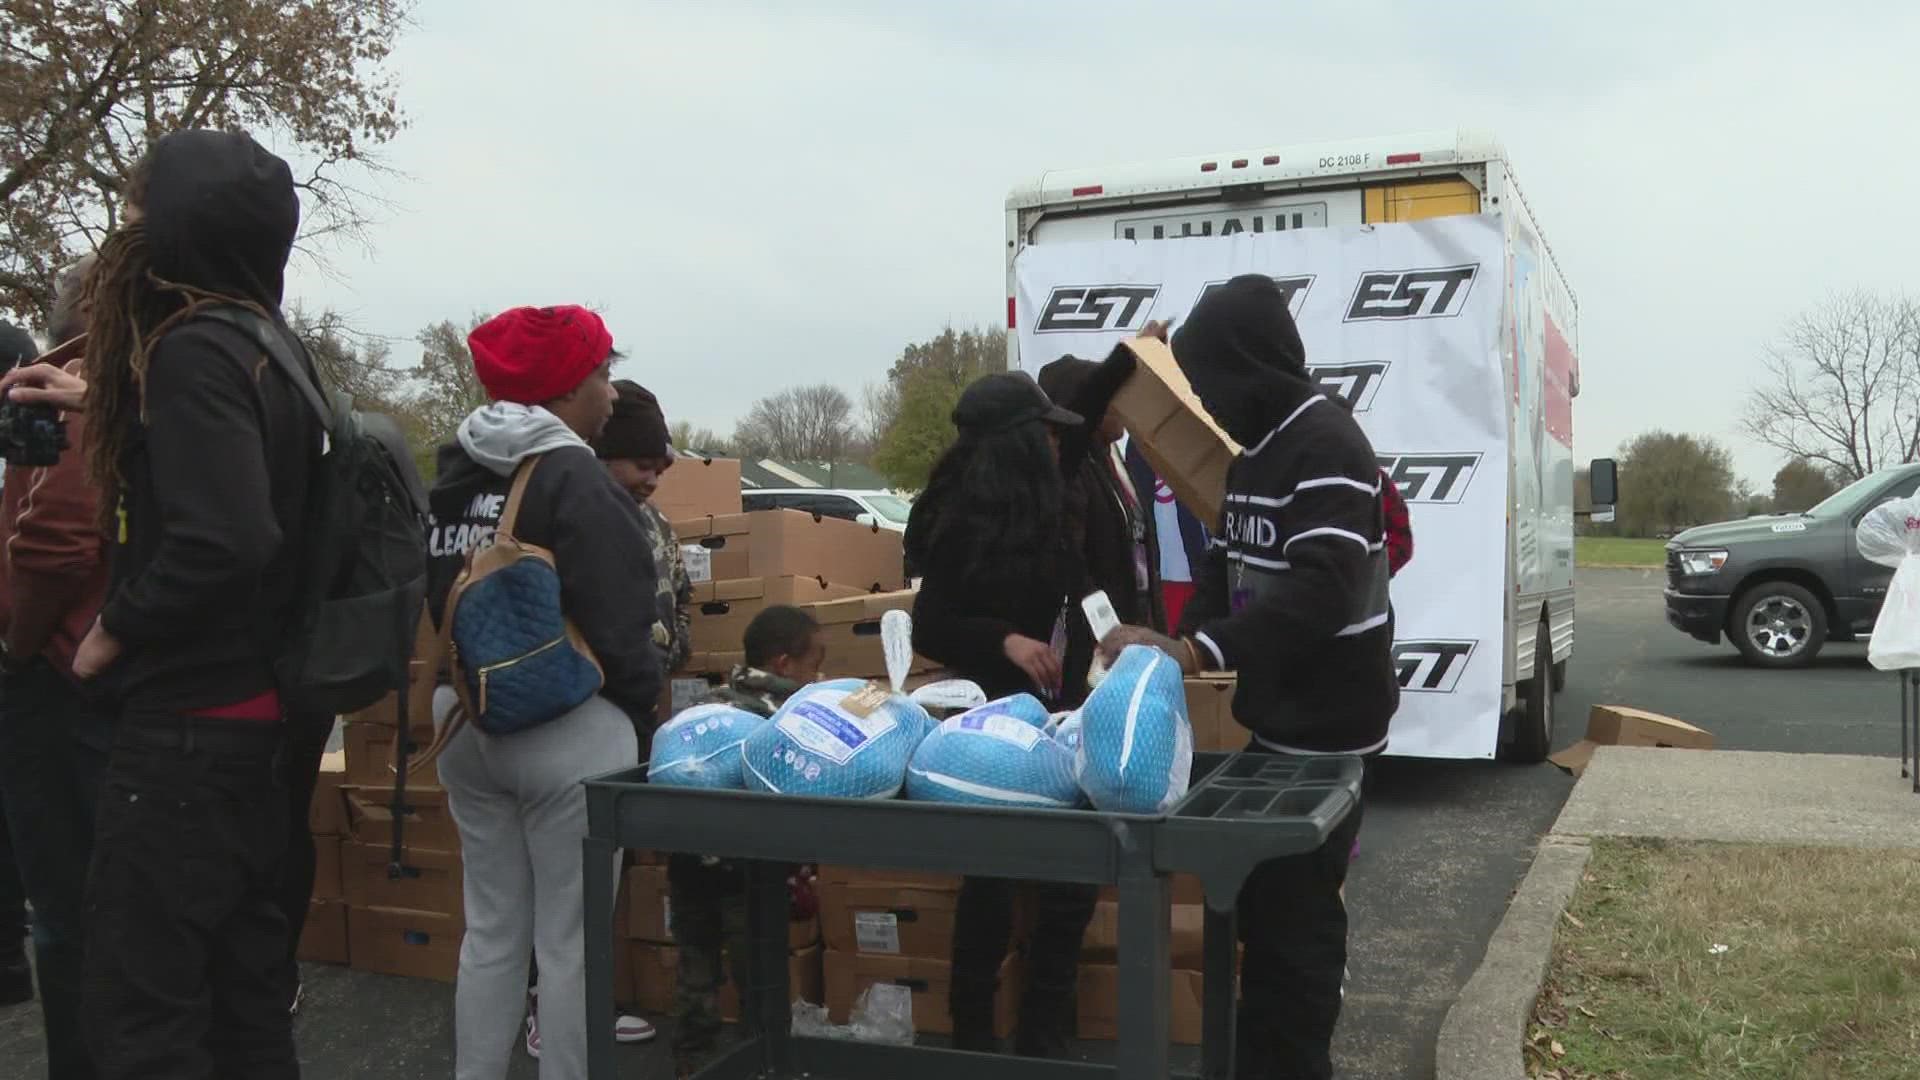 Louisville rapper EST Gee sponsored the giveaway with help from organizations across Kentuckiana.